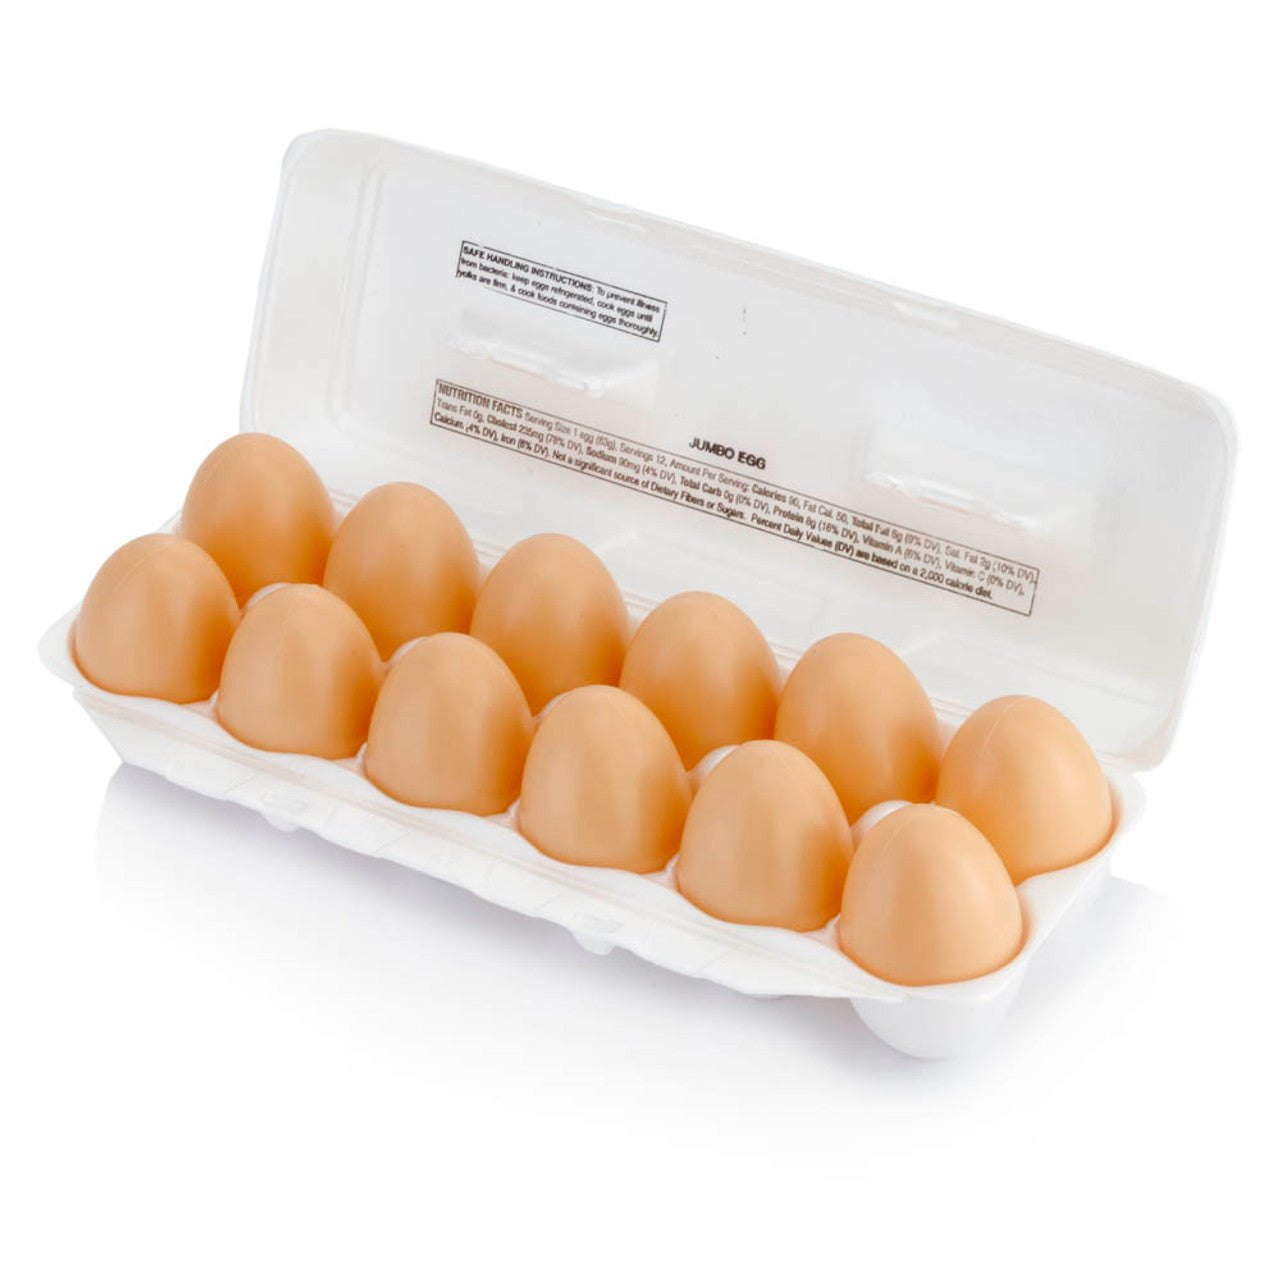 Calories in 12 large Egg (Whole) and Nutrition Facts